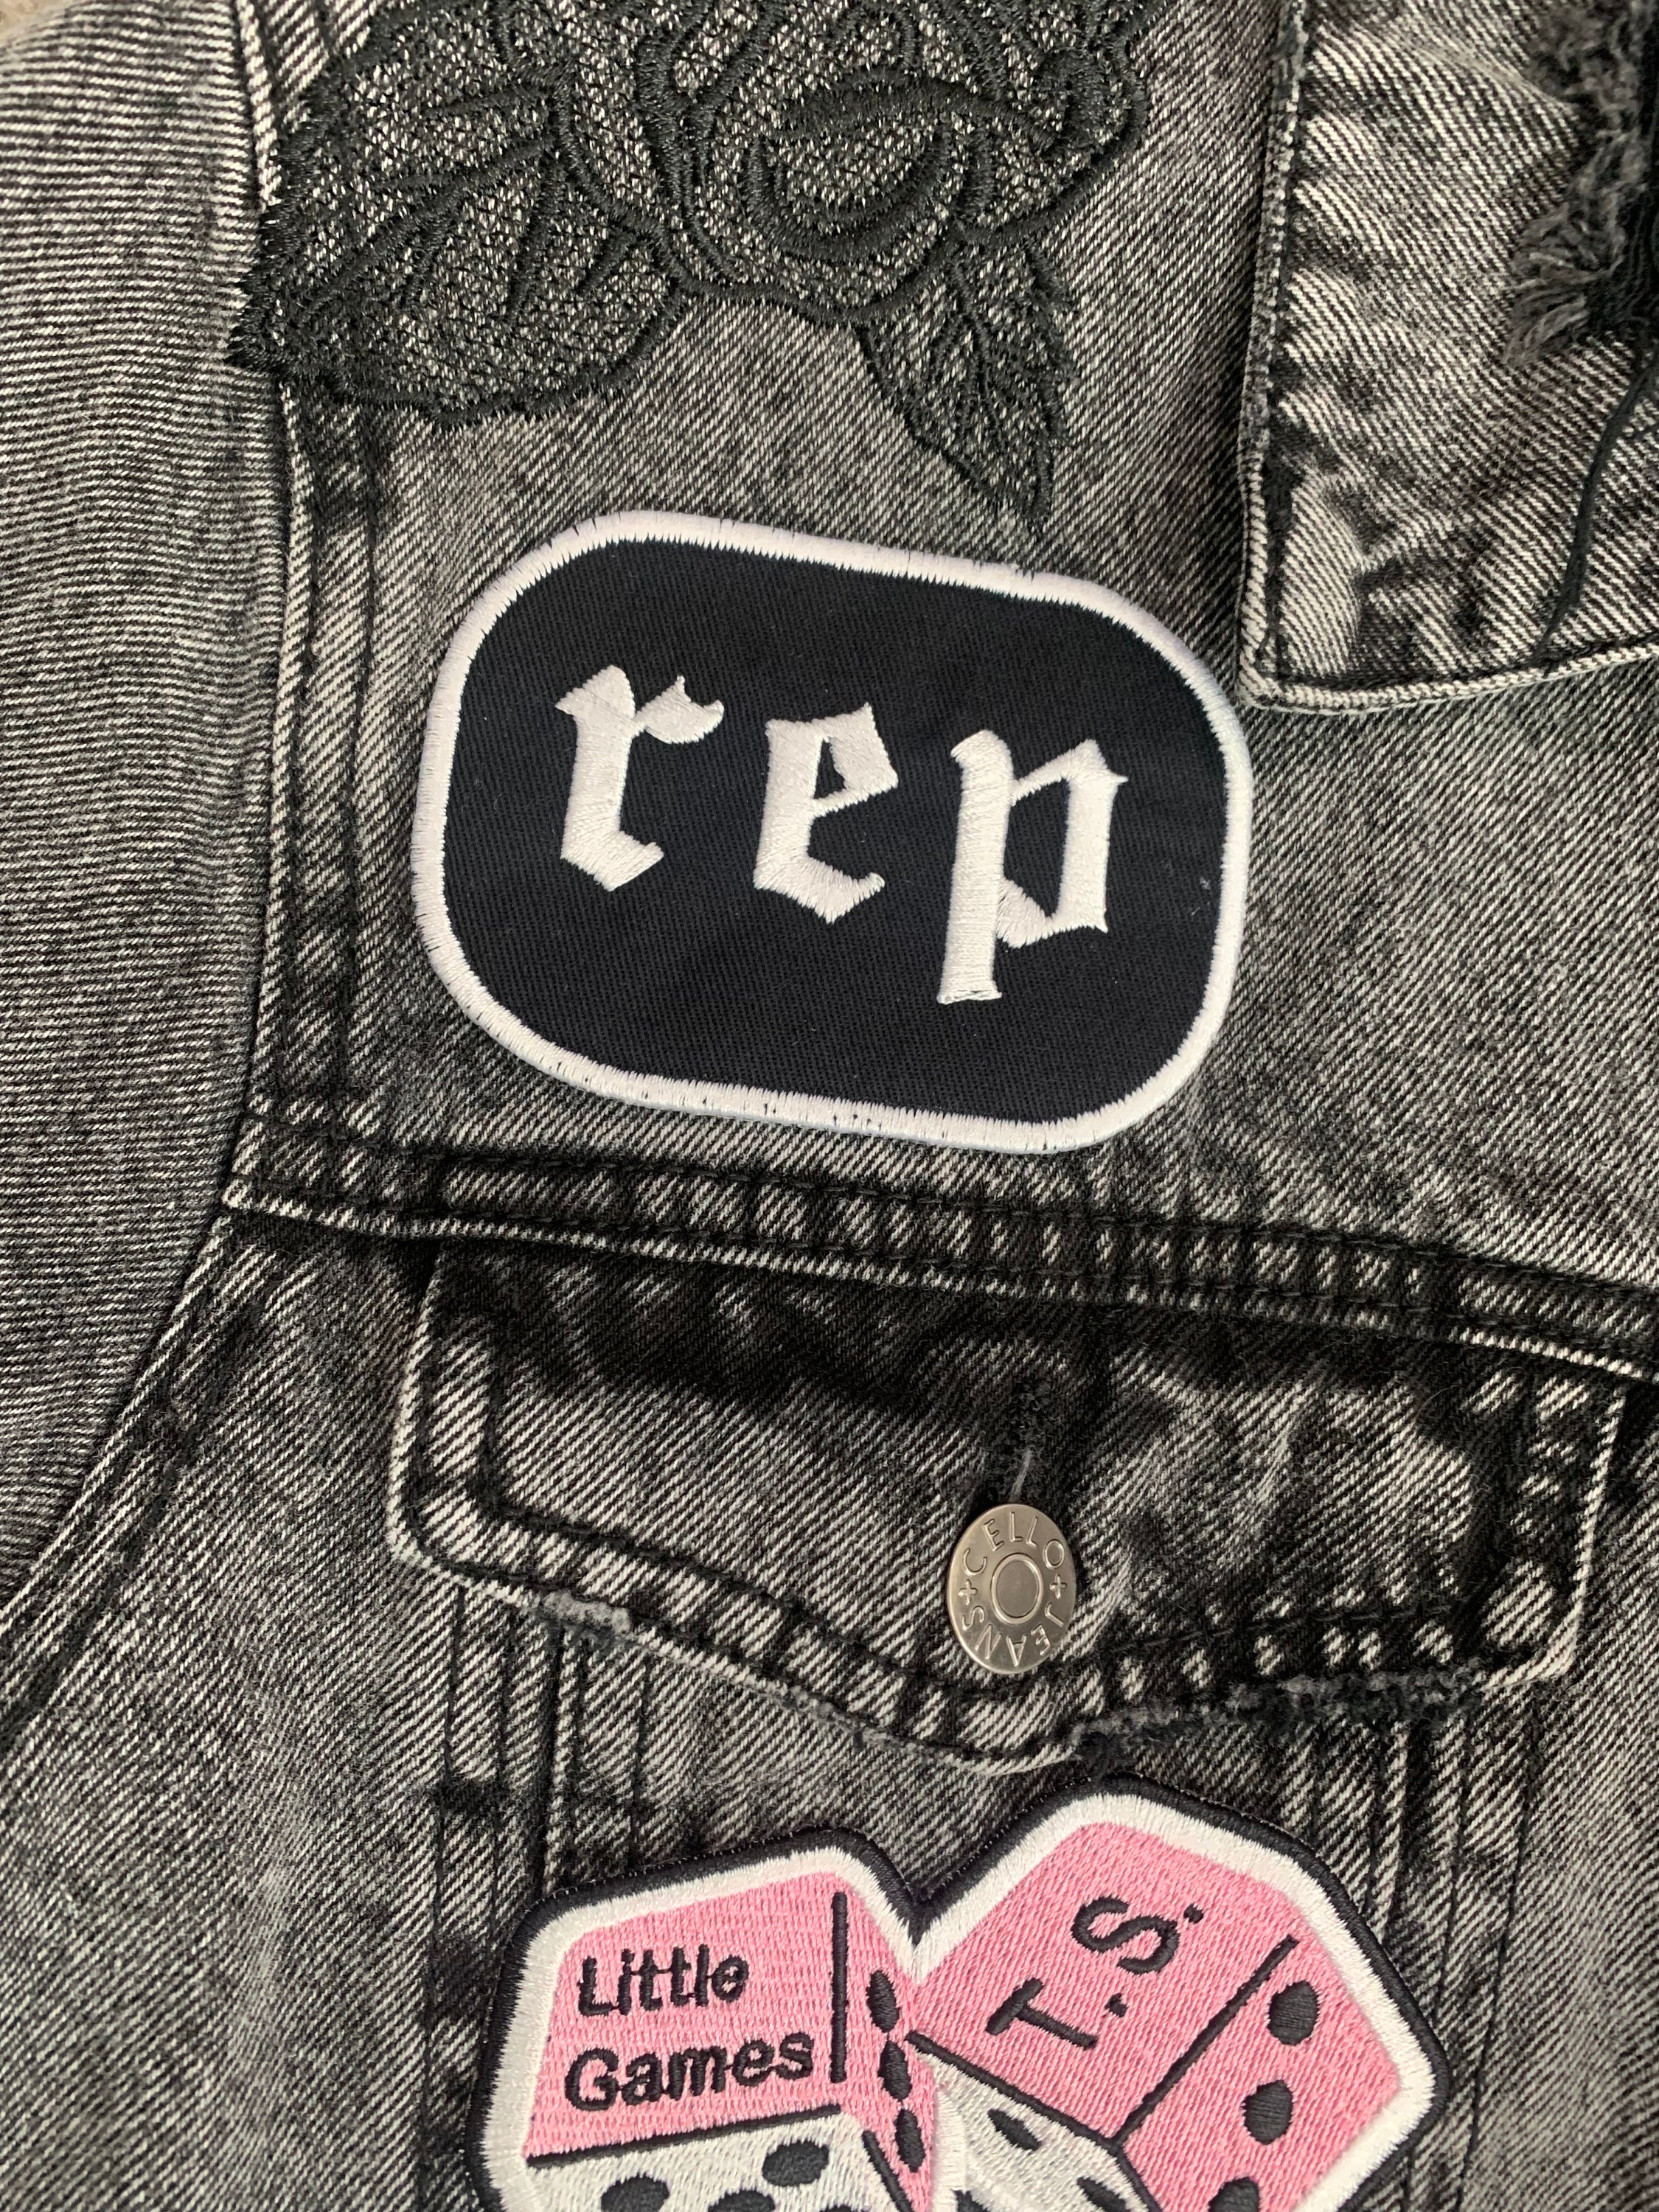 Taylor Swift Reputation Patch Magnet for Sale by youresoheavenly